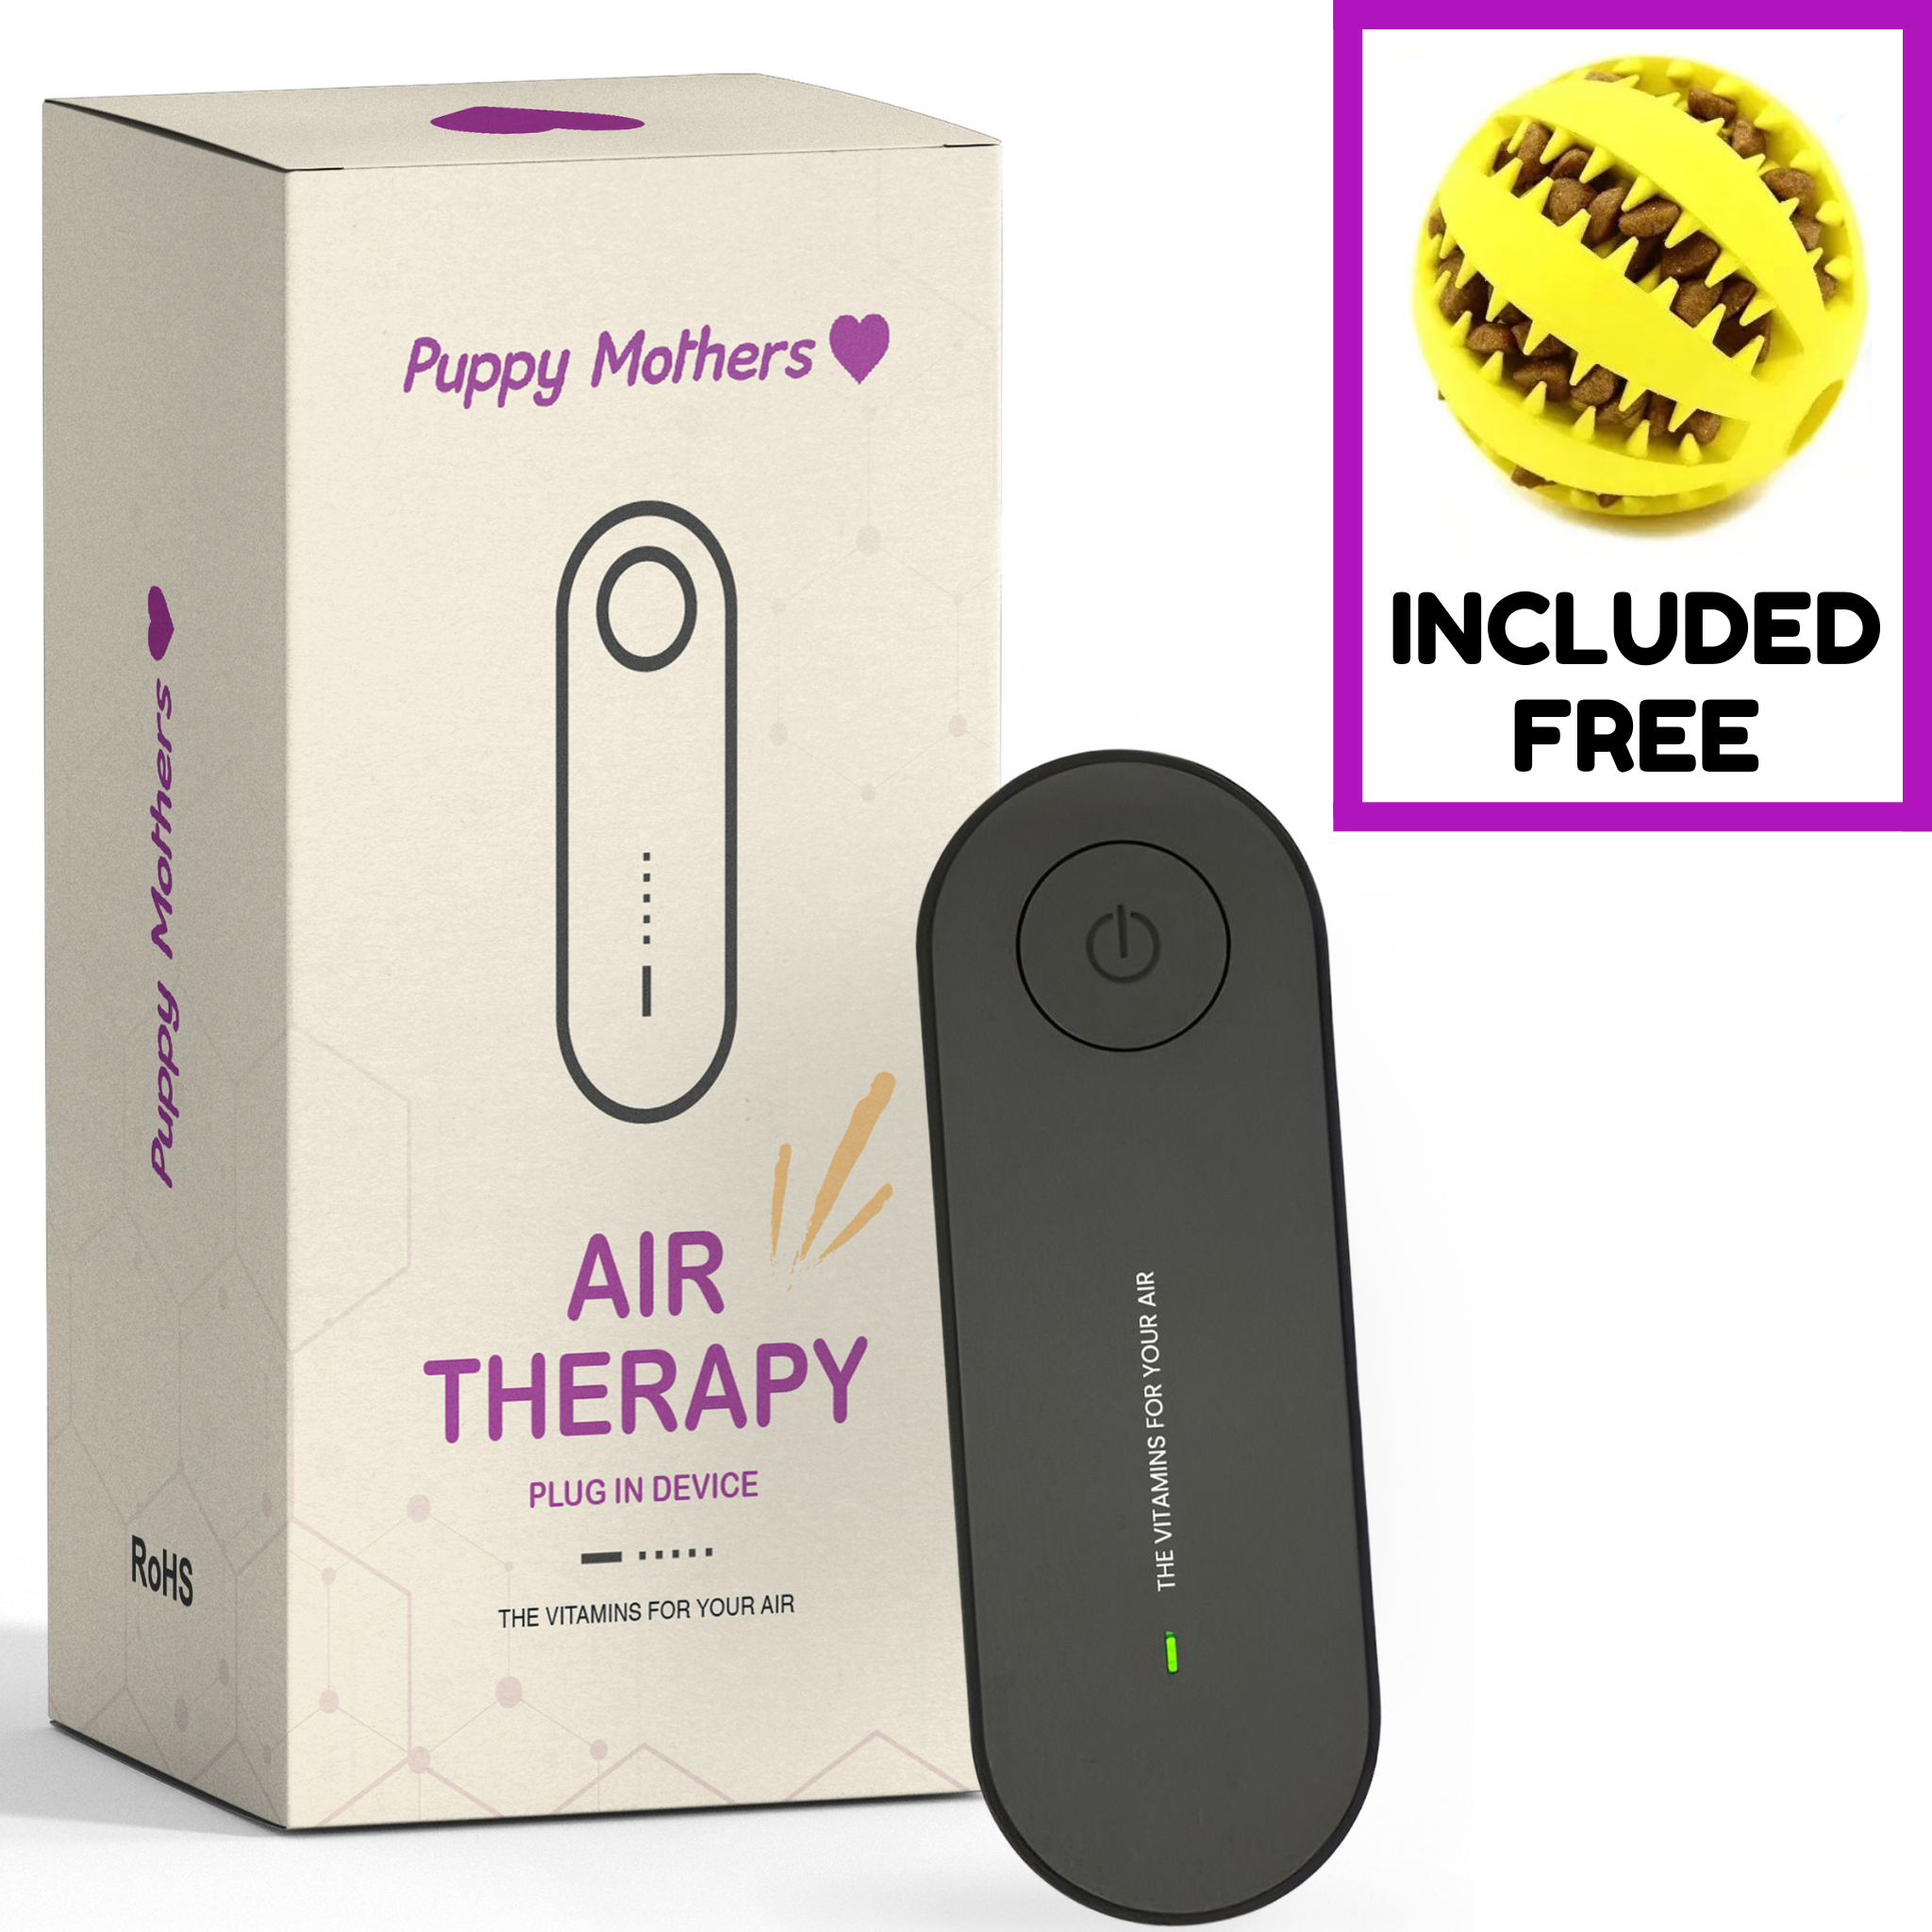 Air Therapy Device + FREE Dog Treat Toy